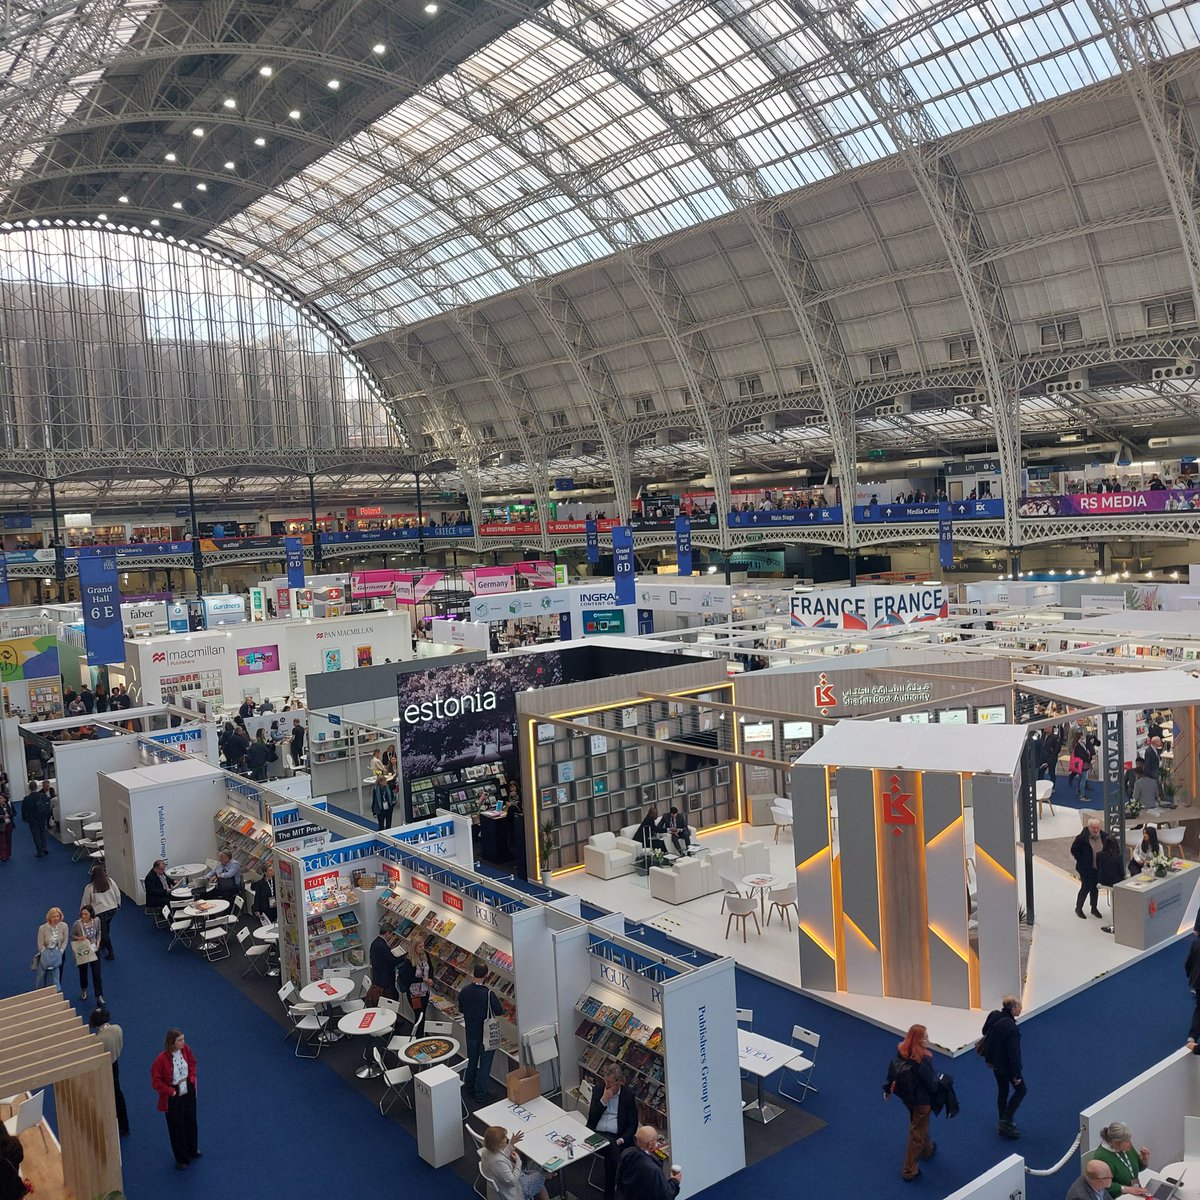 A great day at the London Book Fair catching up with clients and publishers. It's so nice to see everyone after so long and we love seeing all the brilliant non-fiction books coming out in 2024! #LBF2024 #LBF24